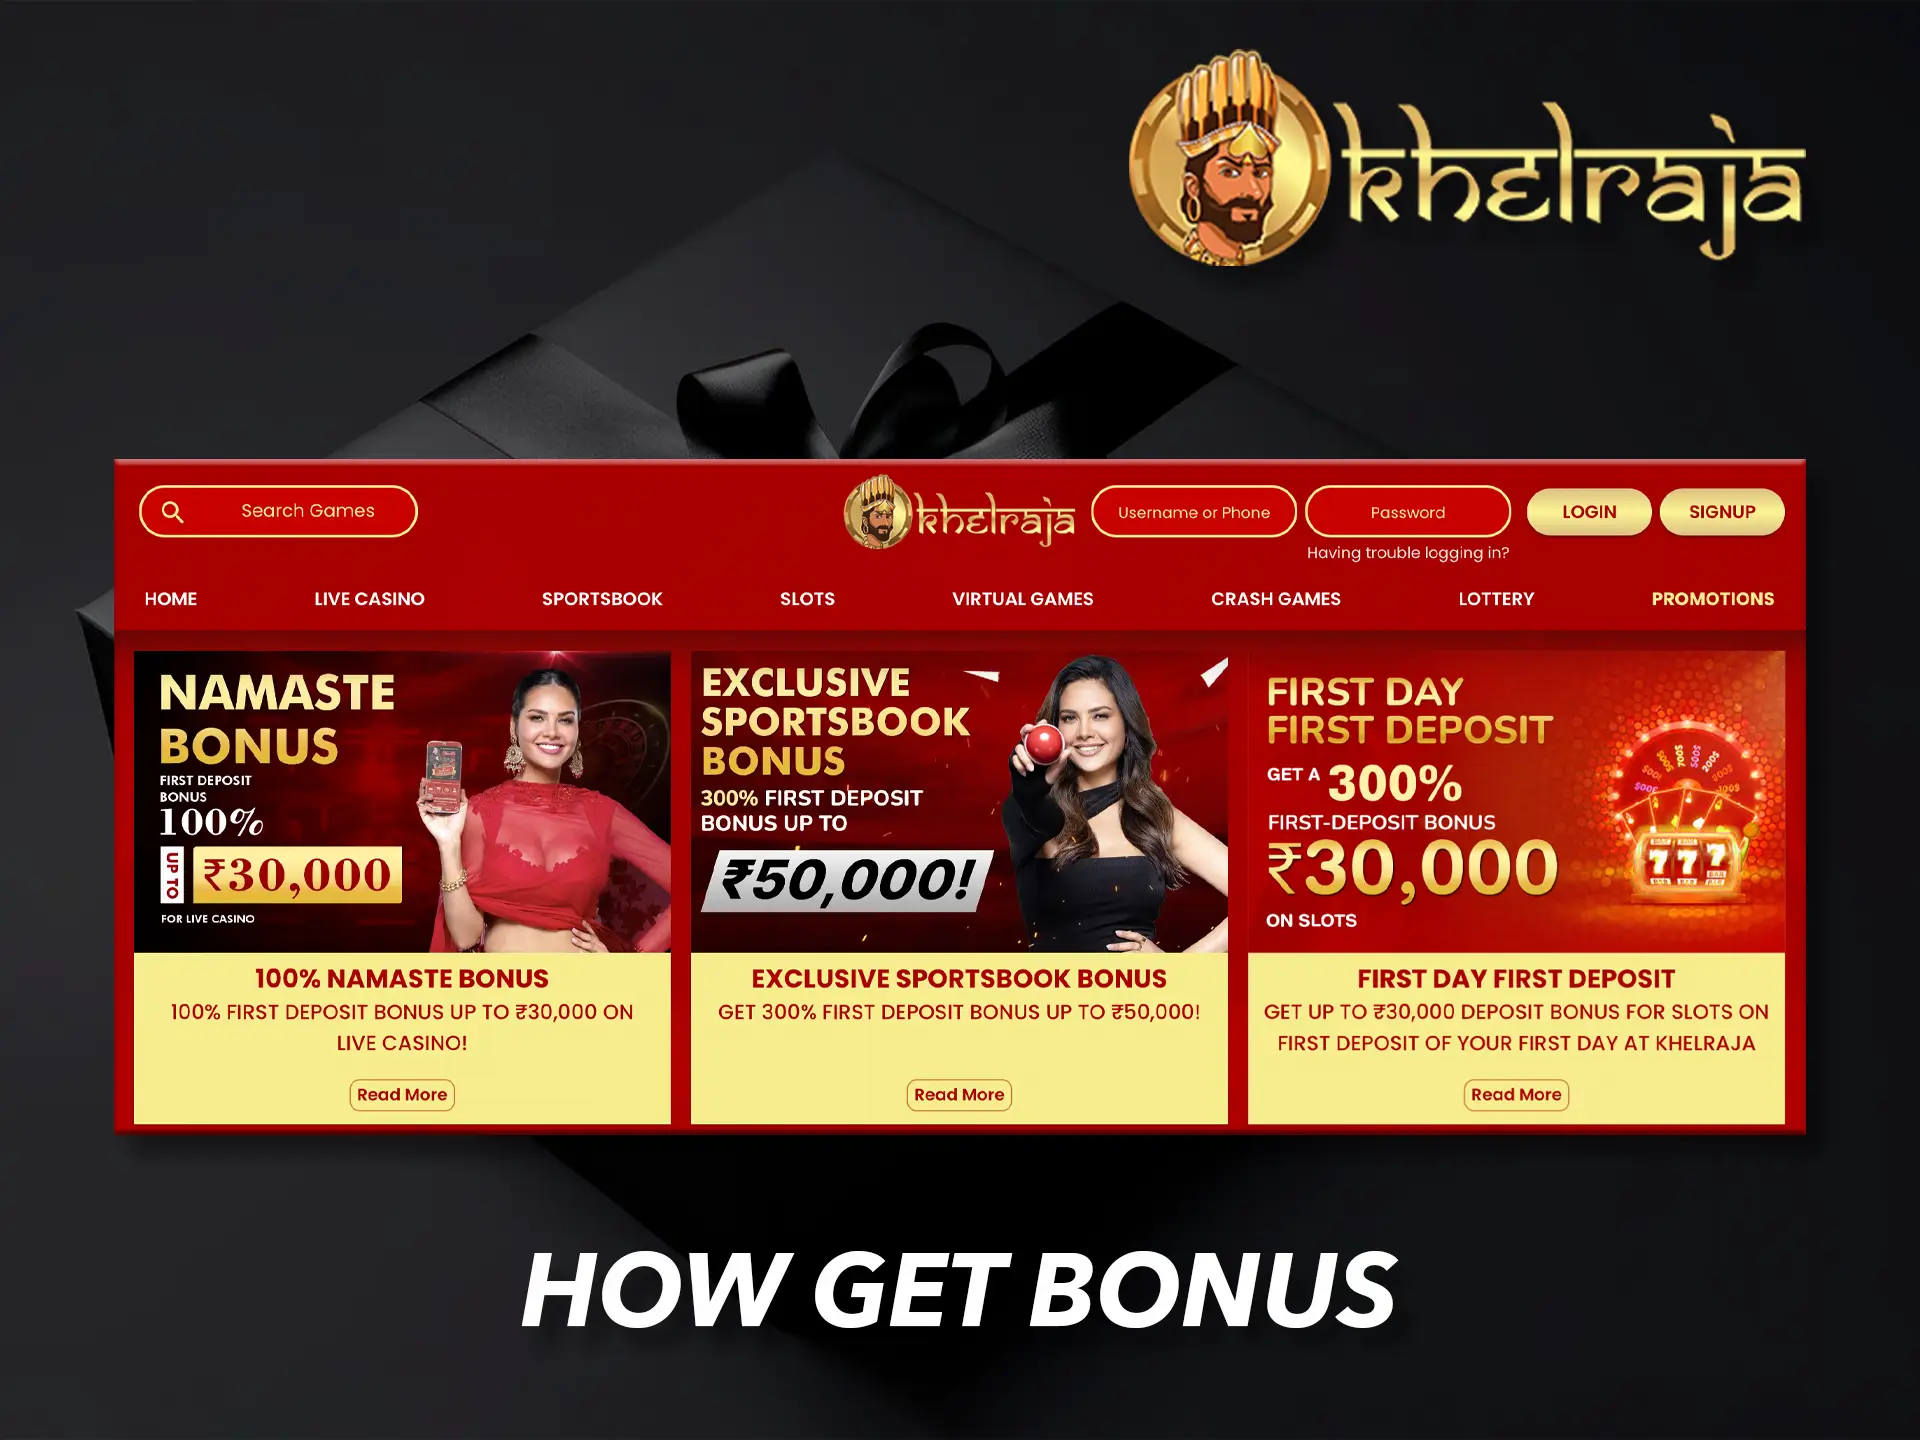 Make a deposit and claim your long awaited first bonus from Khelraja Casino.